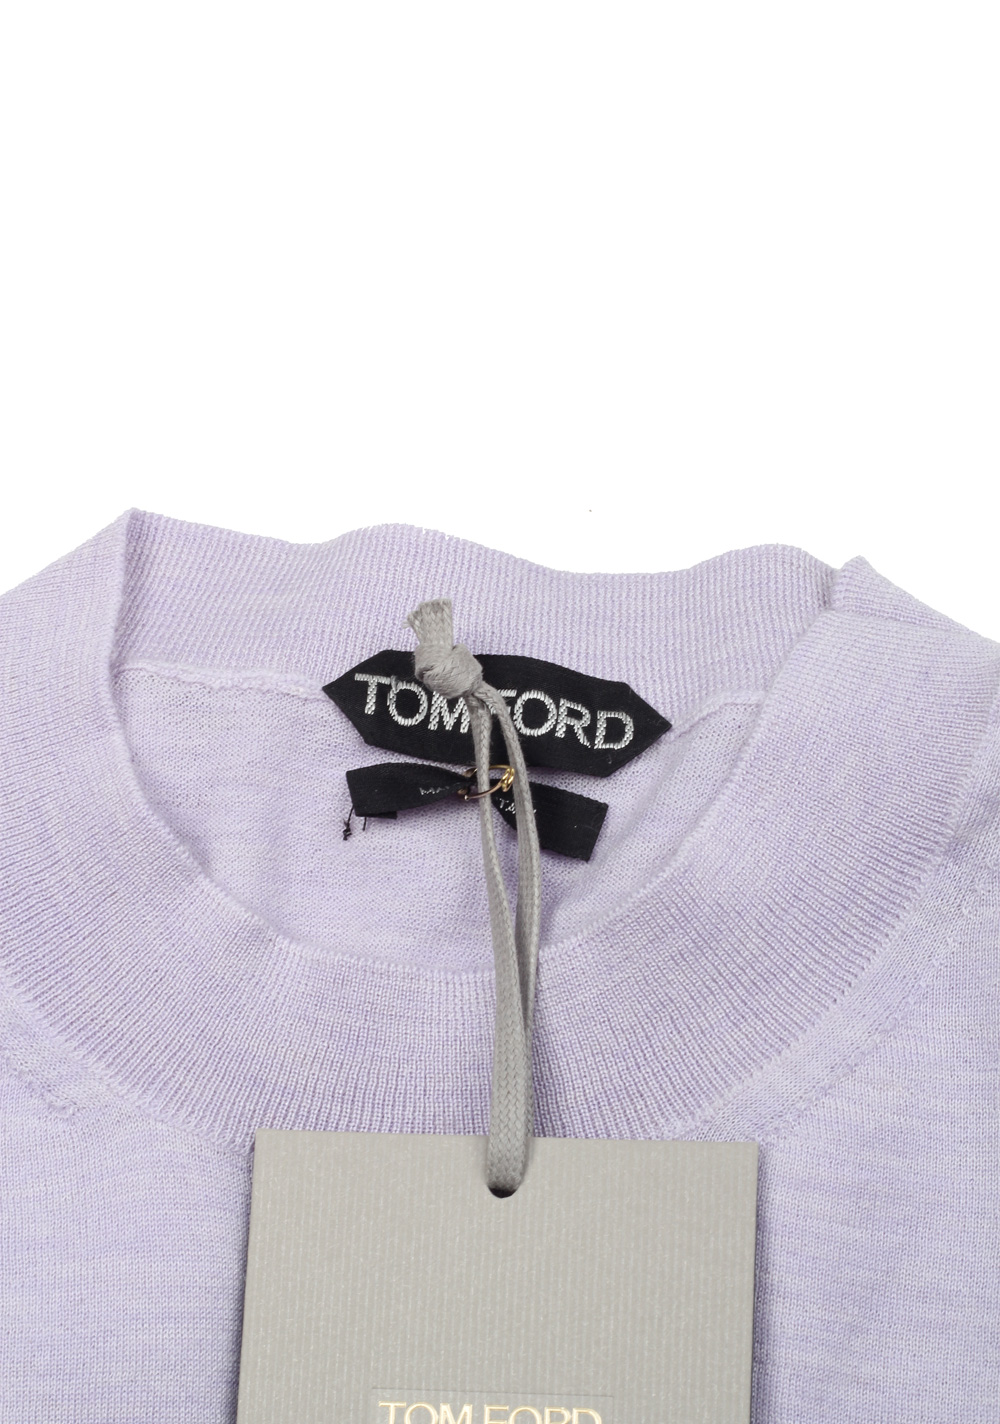 TOM FORD Lilac Crew Neck Sweater Size 48 / 38R U.S. In Cashmere | Costume Limité